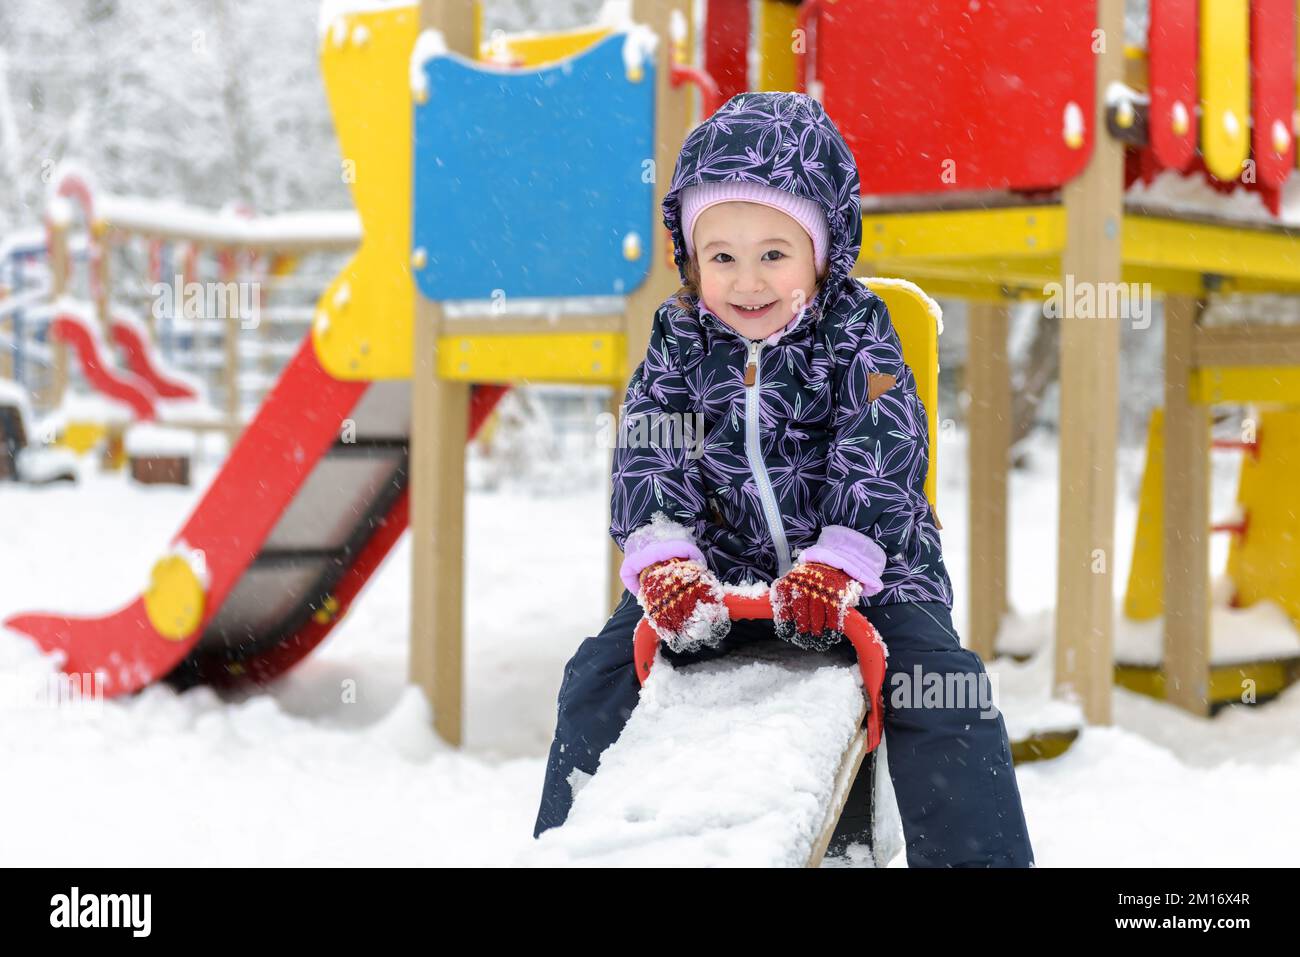 Child on seesaw in winter, little kid having fun on snowy playground. Baby girl plays and looks at camera in urban park. Theme of snow, game, Christma Stock Photo